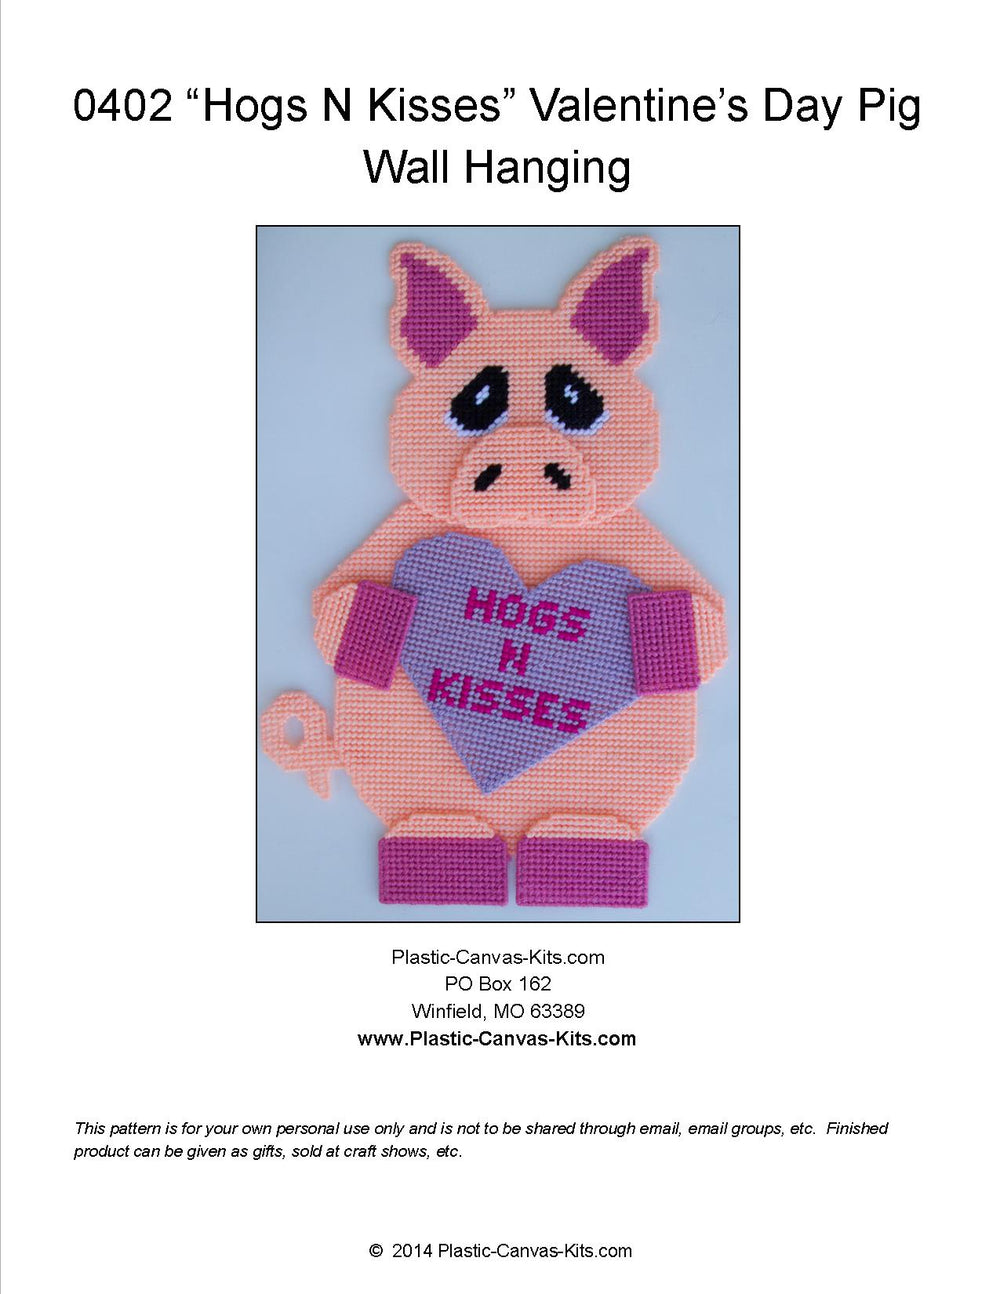 Hogs N Kisses Valentine's Day Pig Wall Hanging